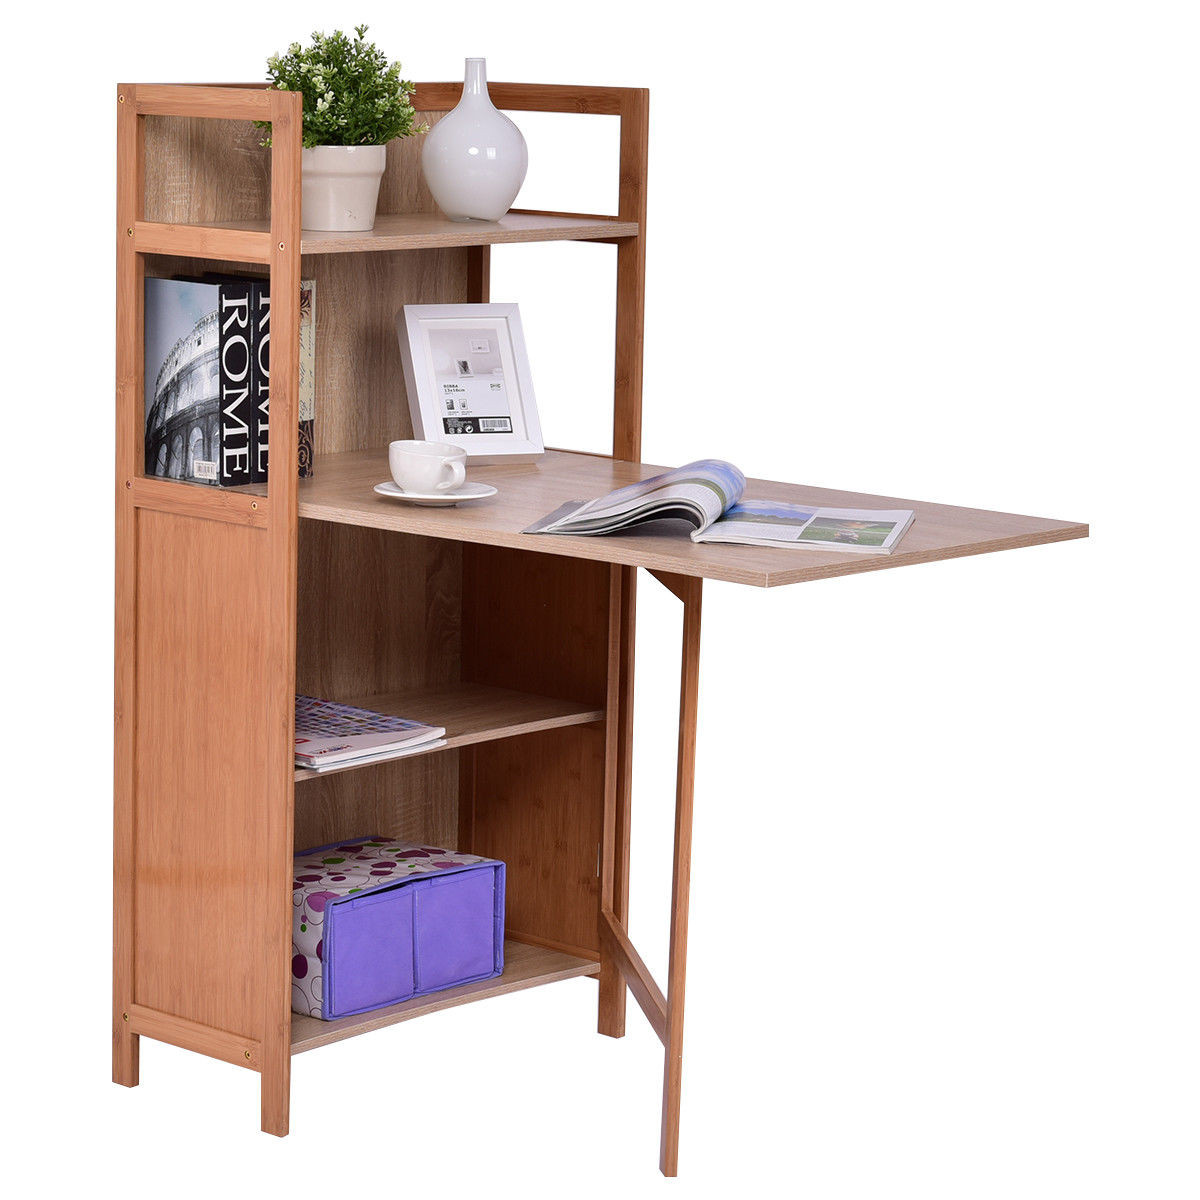 2-In-1 Convertible Wood Folding Desk Cabinet With Bookshelf